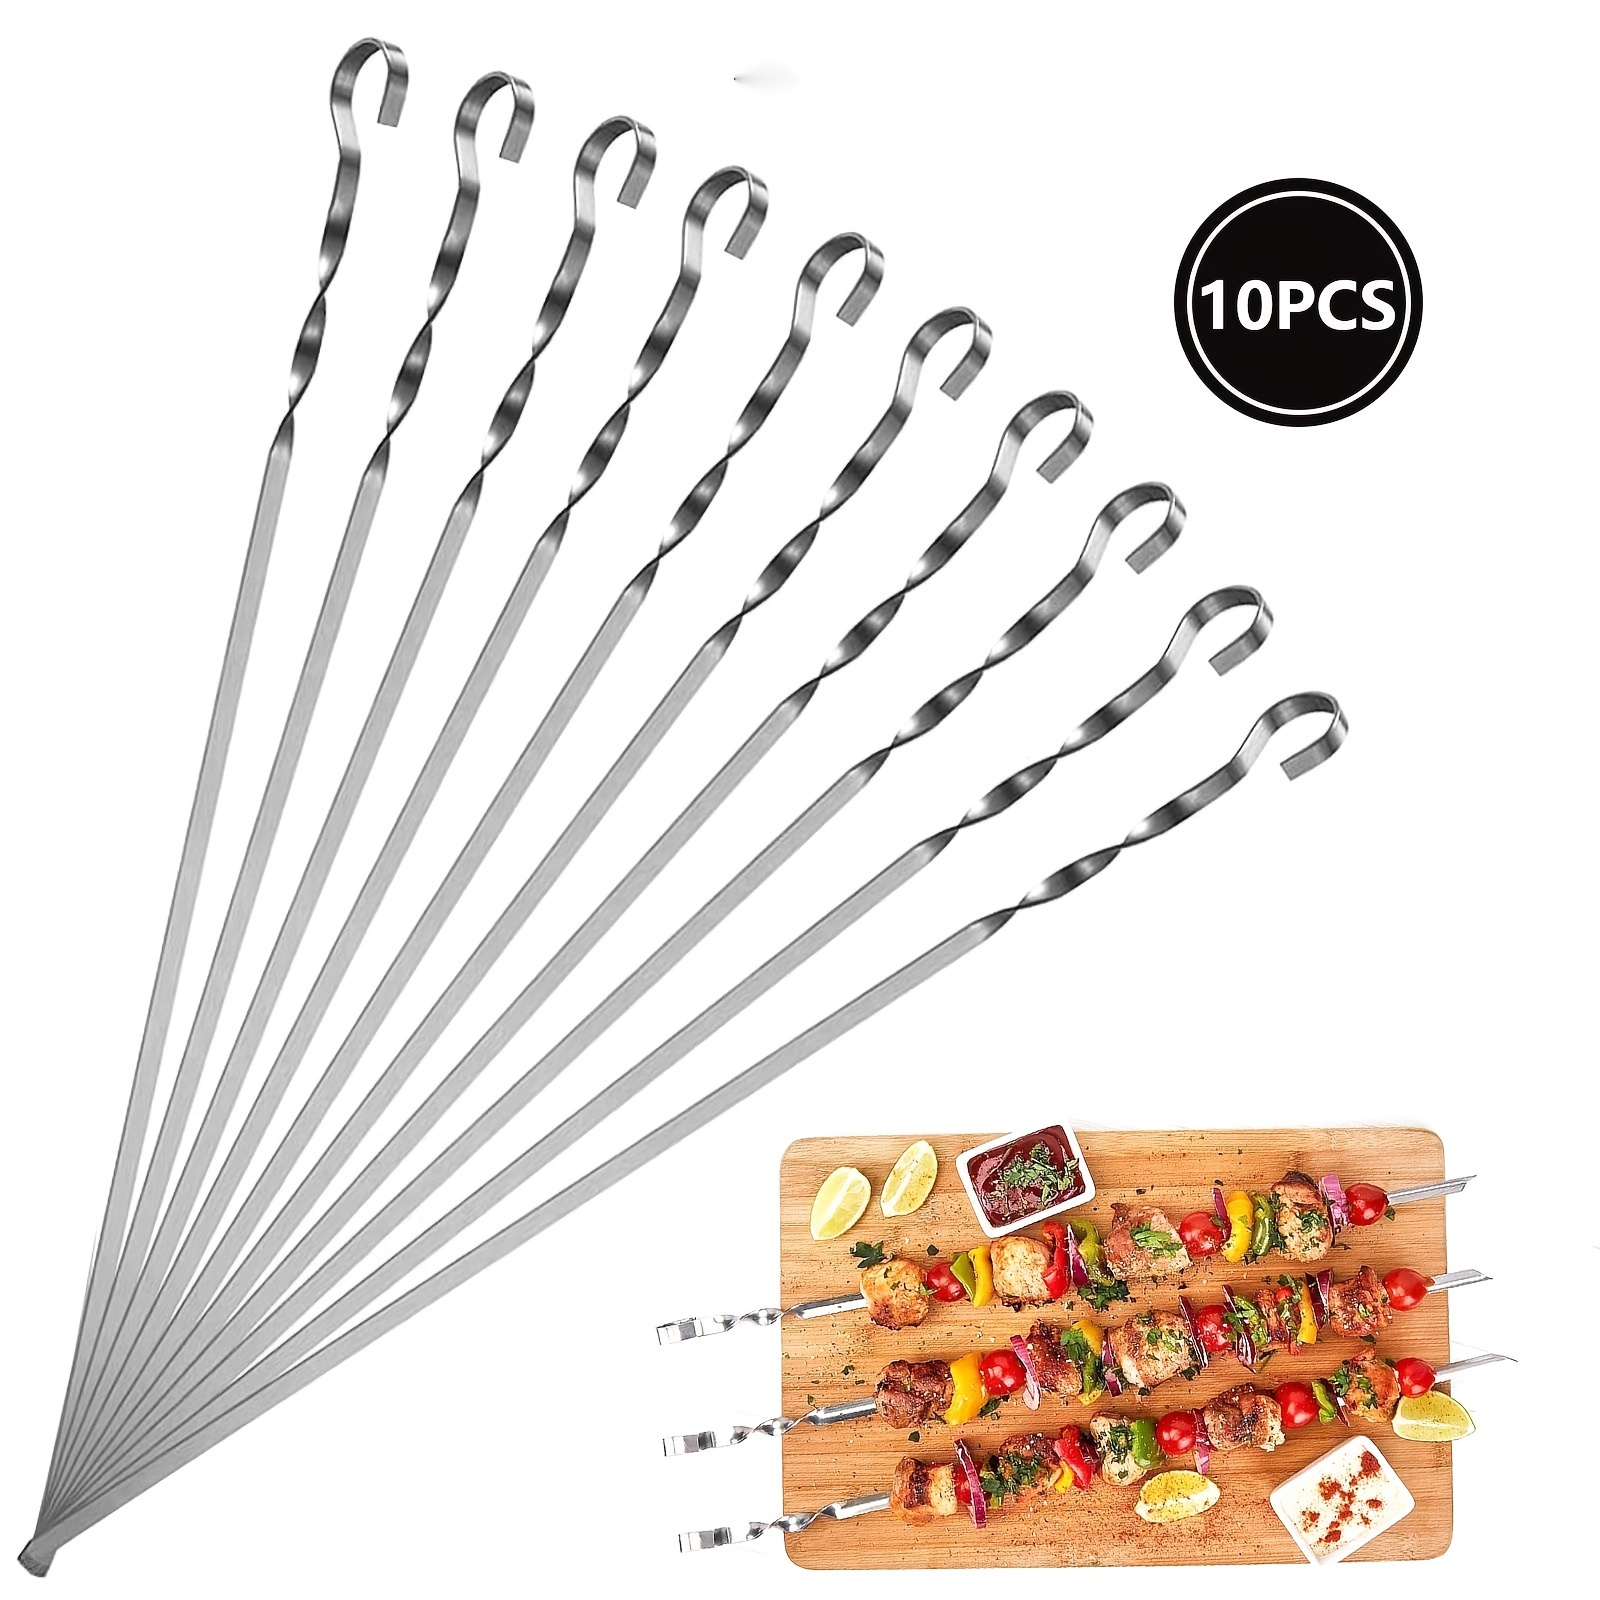 

10pcs Reusable Stainless Steel Barbecue Skewers - Perfect For Outdoor Grilling & Camping!